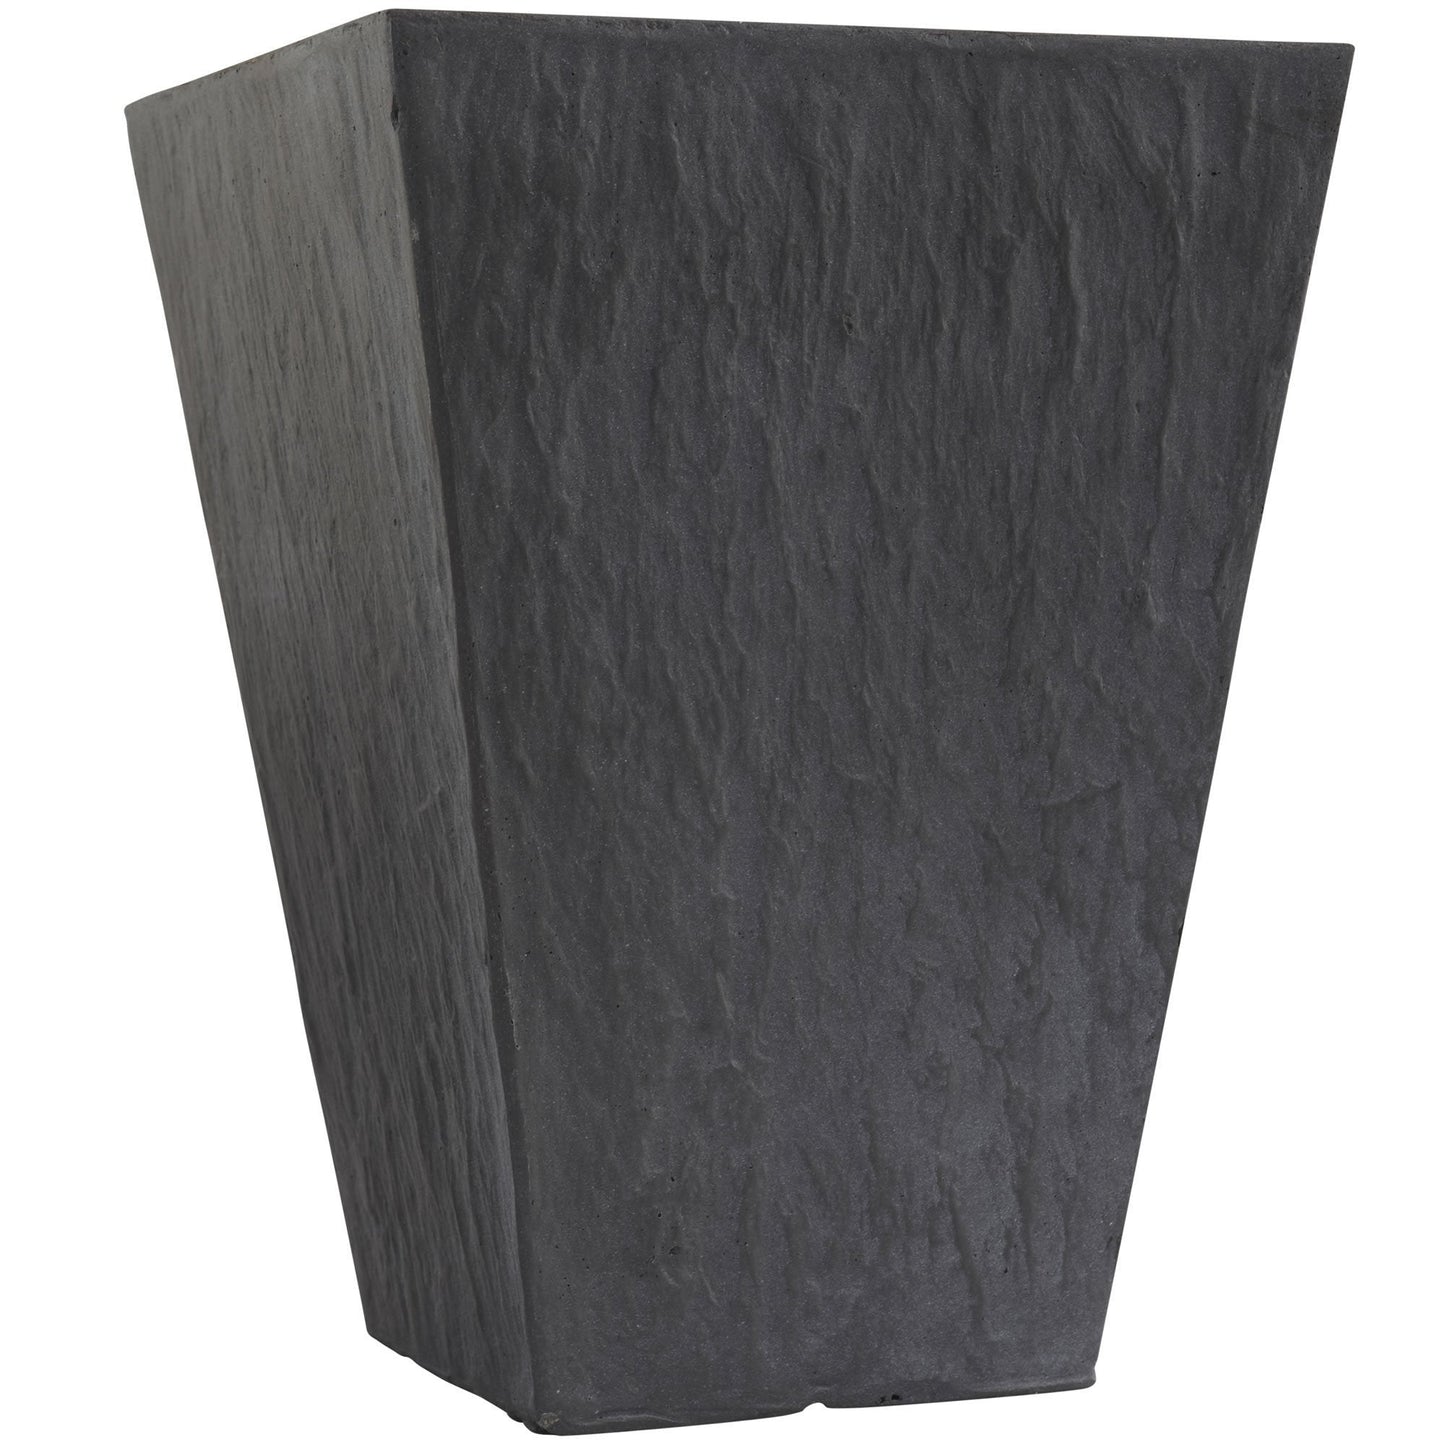 16” Slate Planter (Indoor/Outdoor) by Nearly Natural